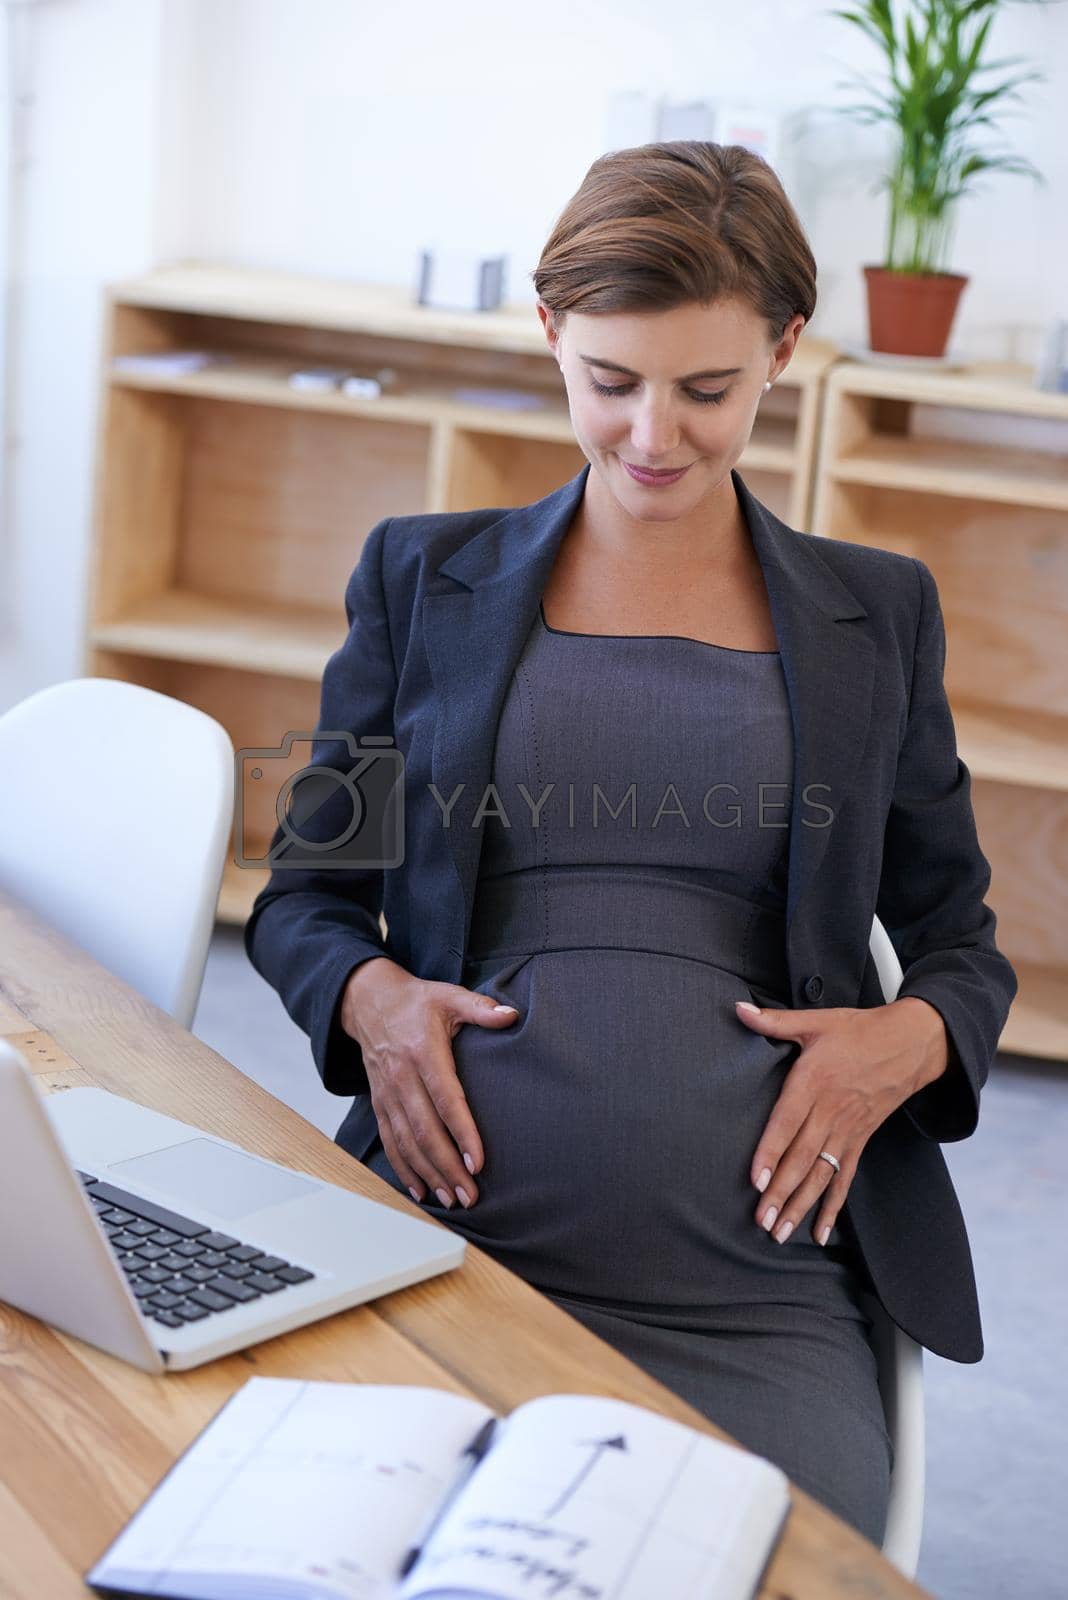 Royalty free image of The movement of life inside you, theres no better feeling. a business woman touching her pregnant belly. by YuriArcurs